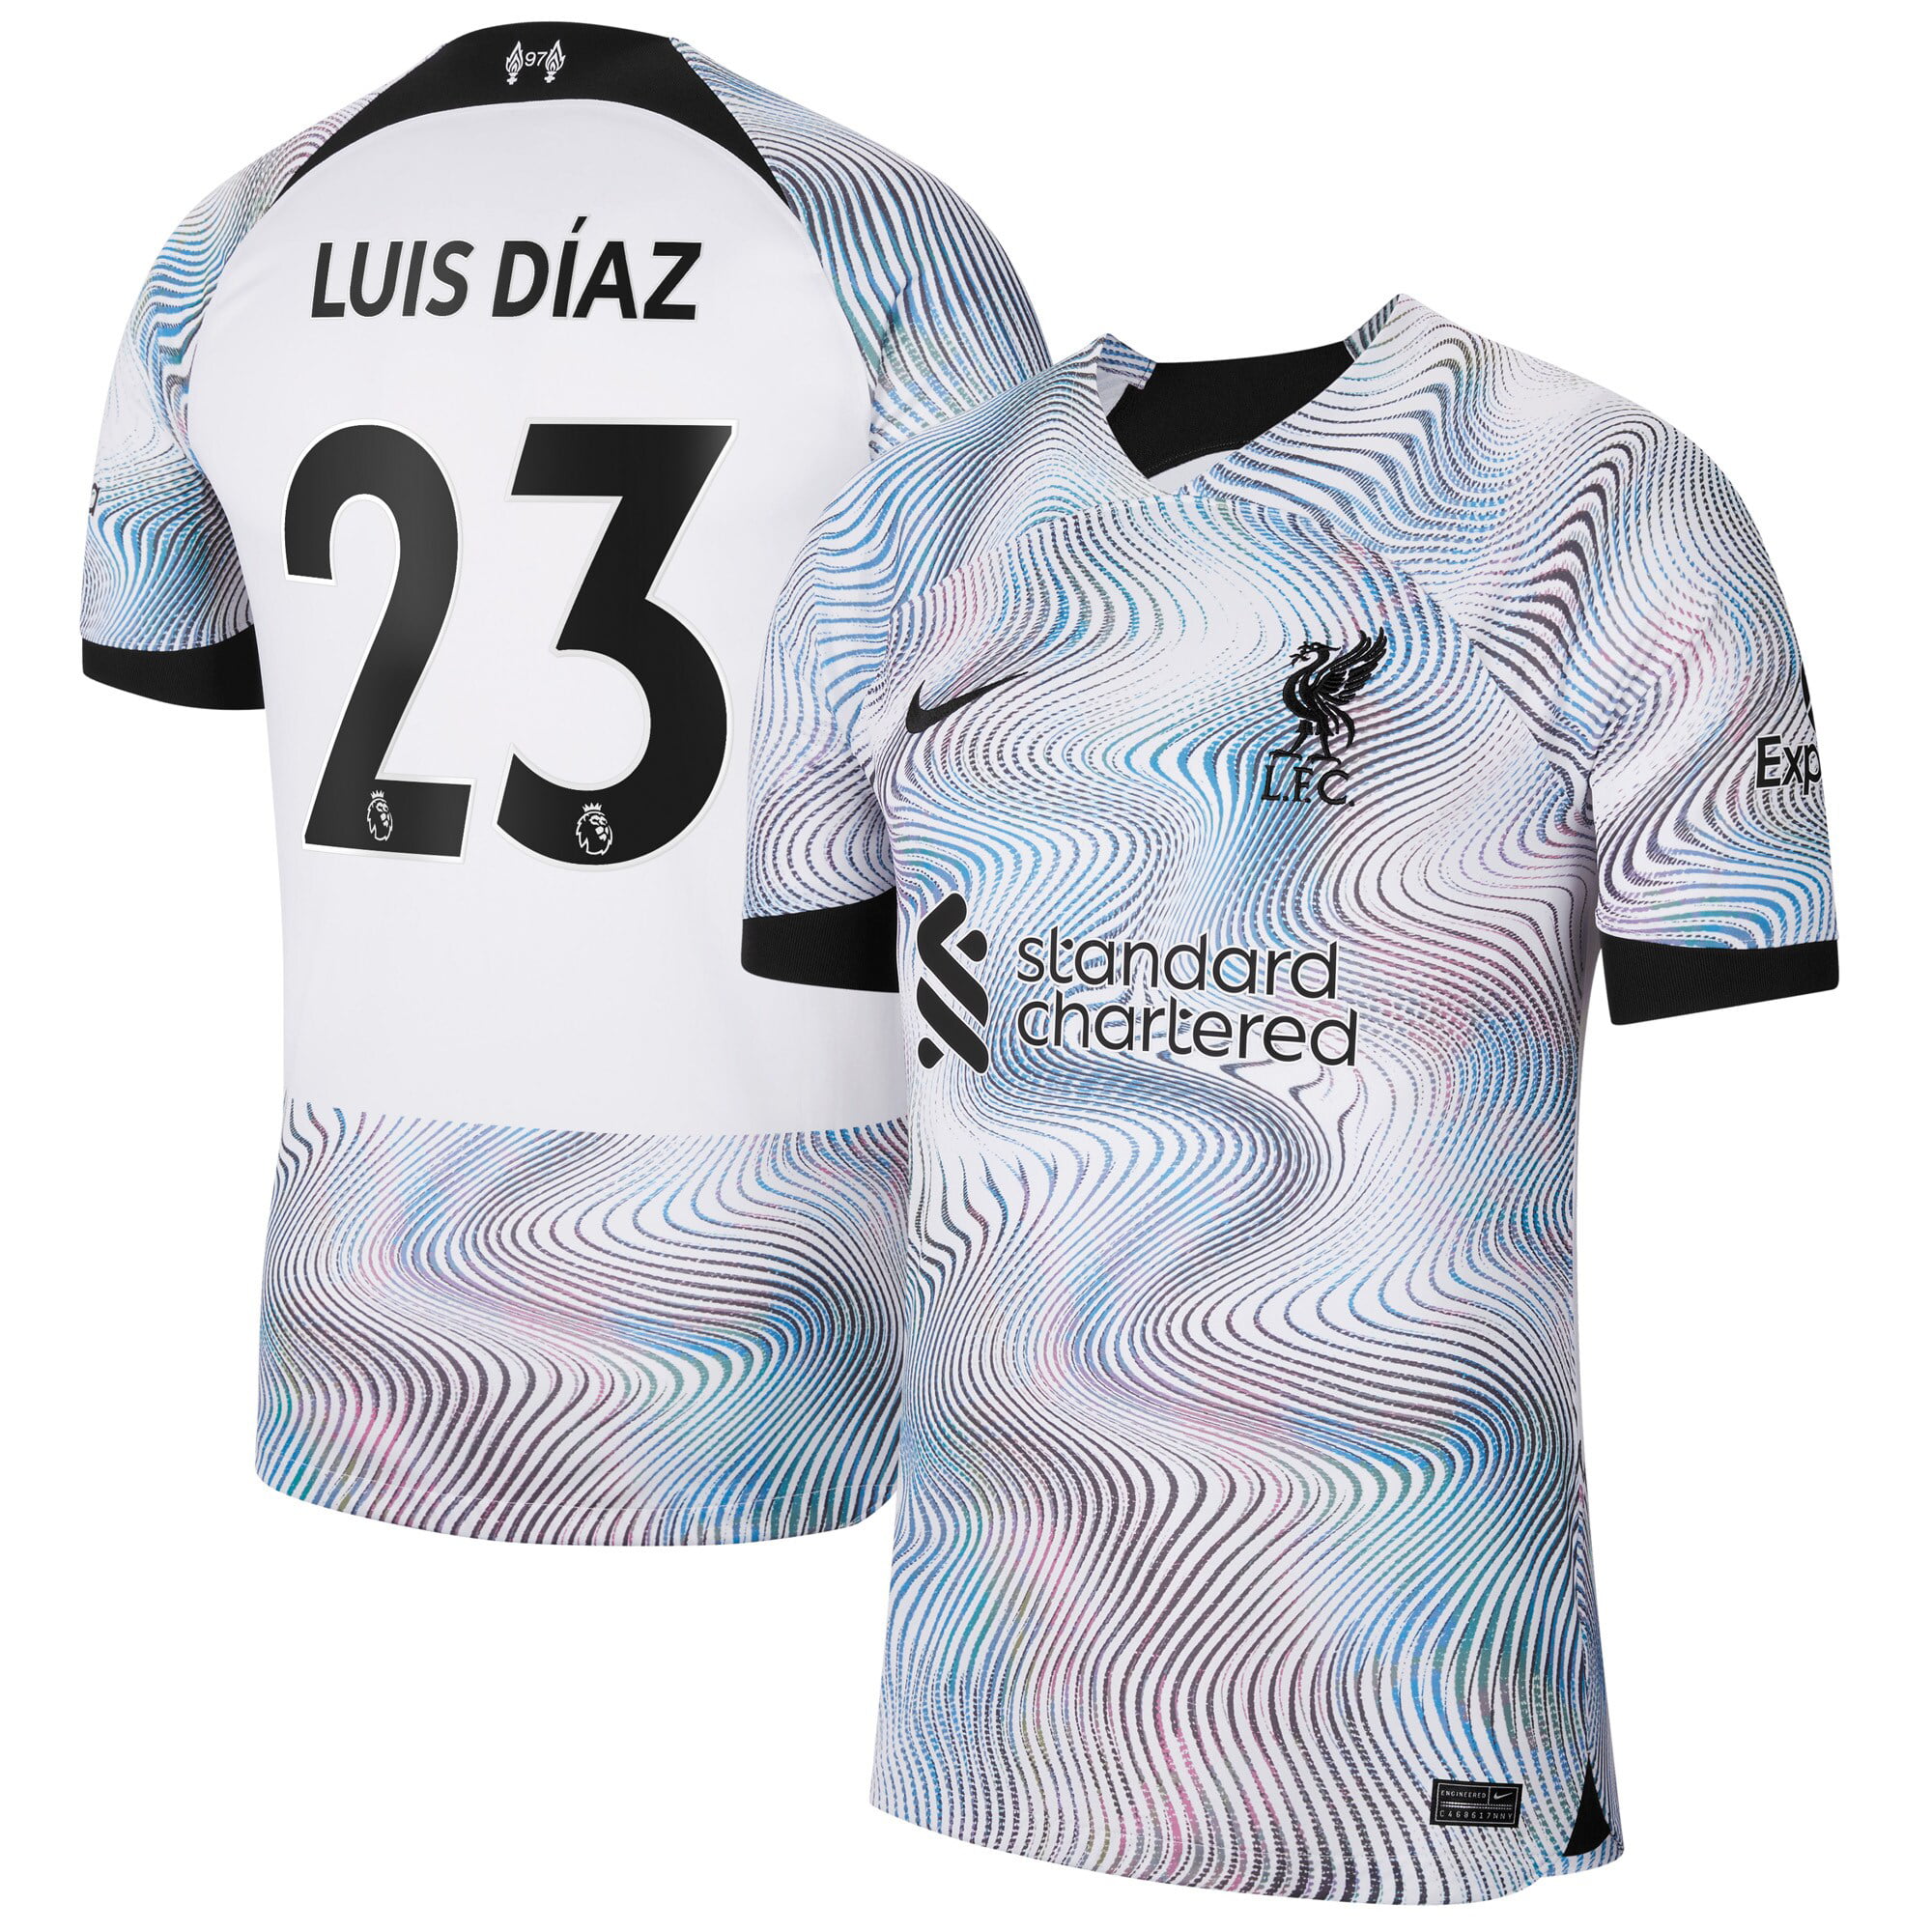 Replica LUIS DiAZ #23 Liverpool Home Jersey 2022/23 By Nike